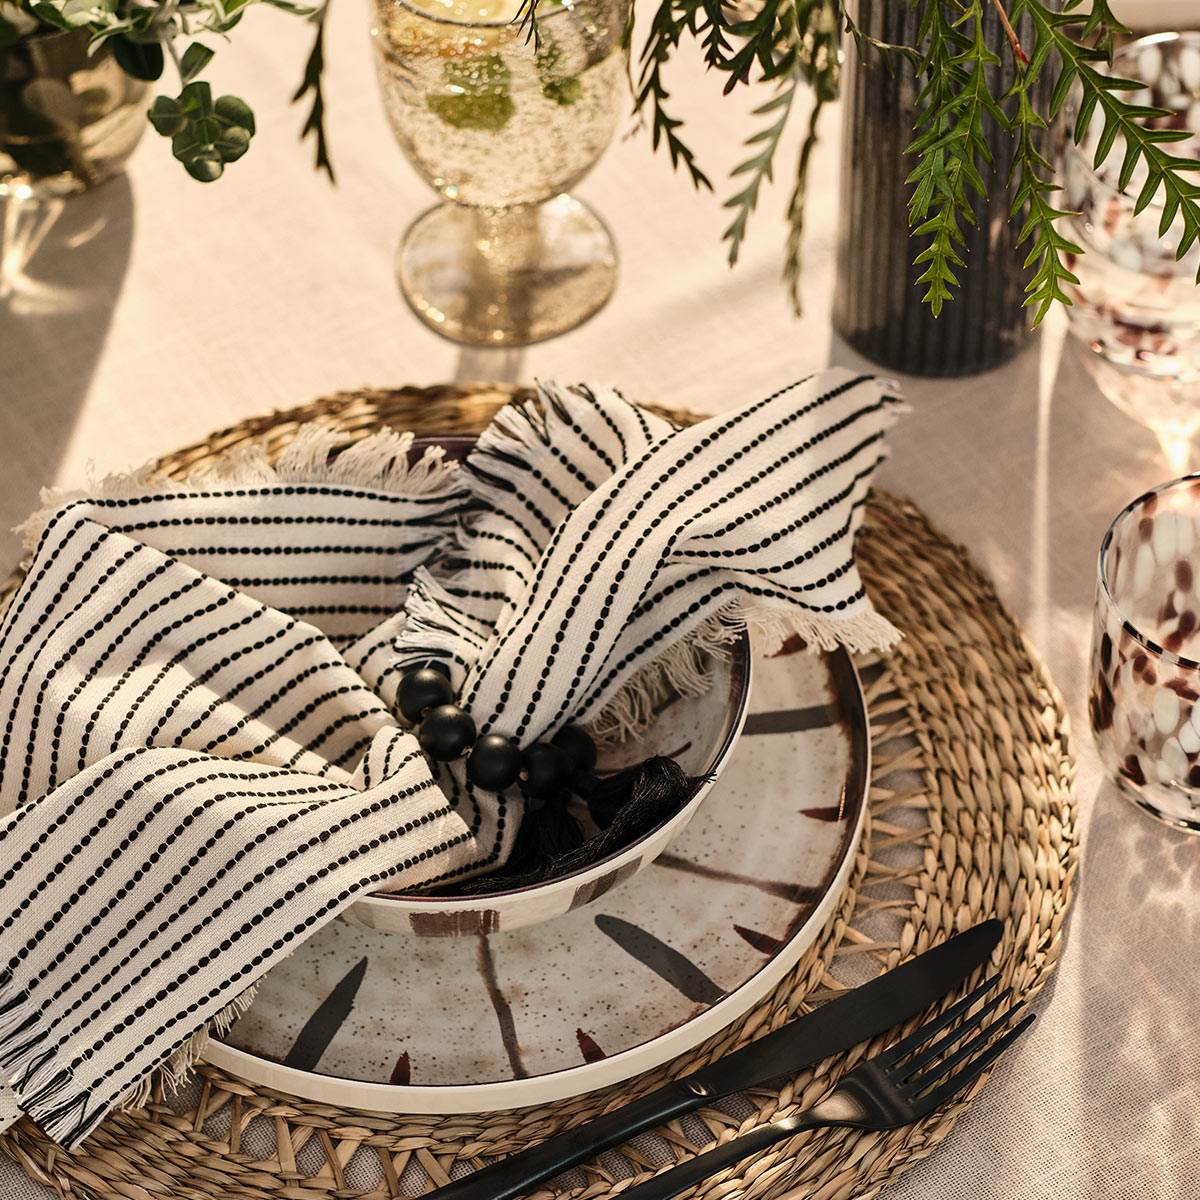 Table set for an outdoor dinner party